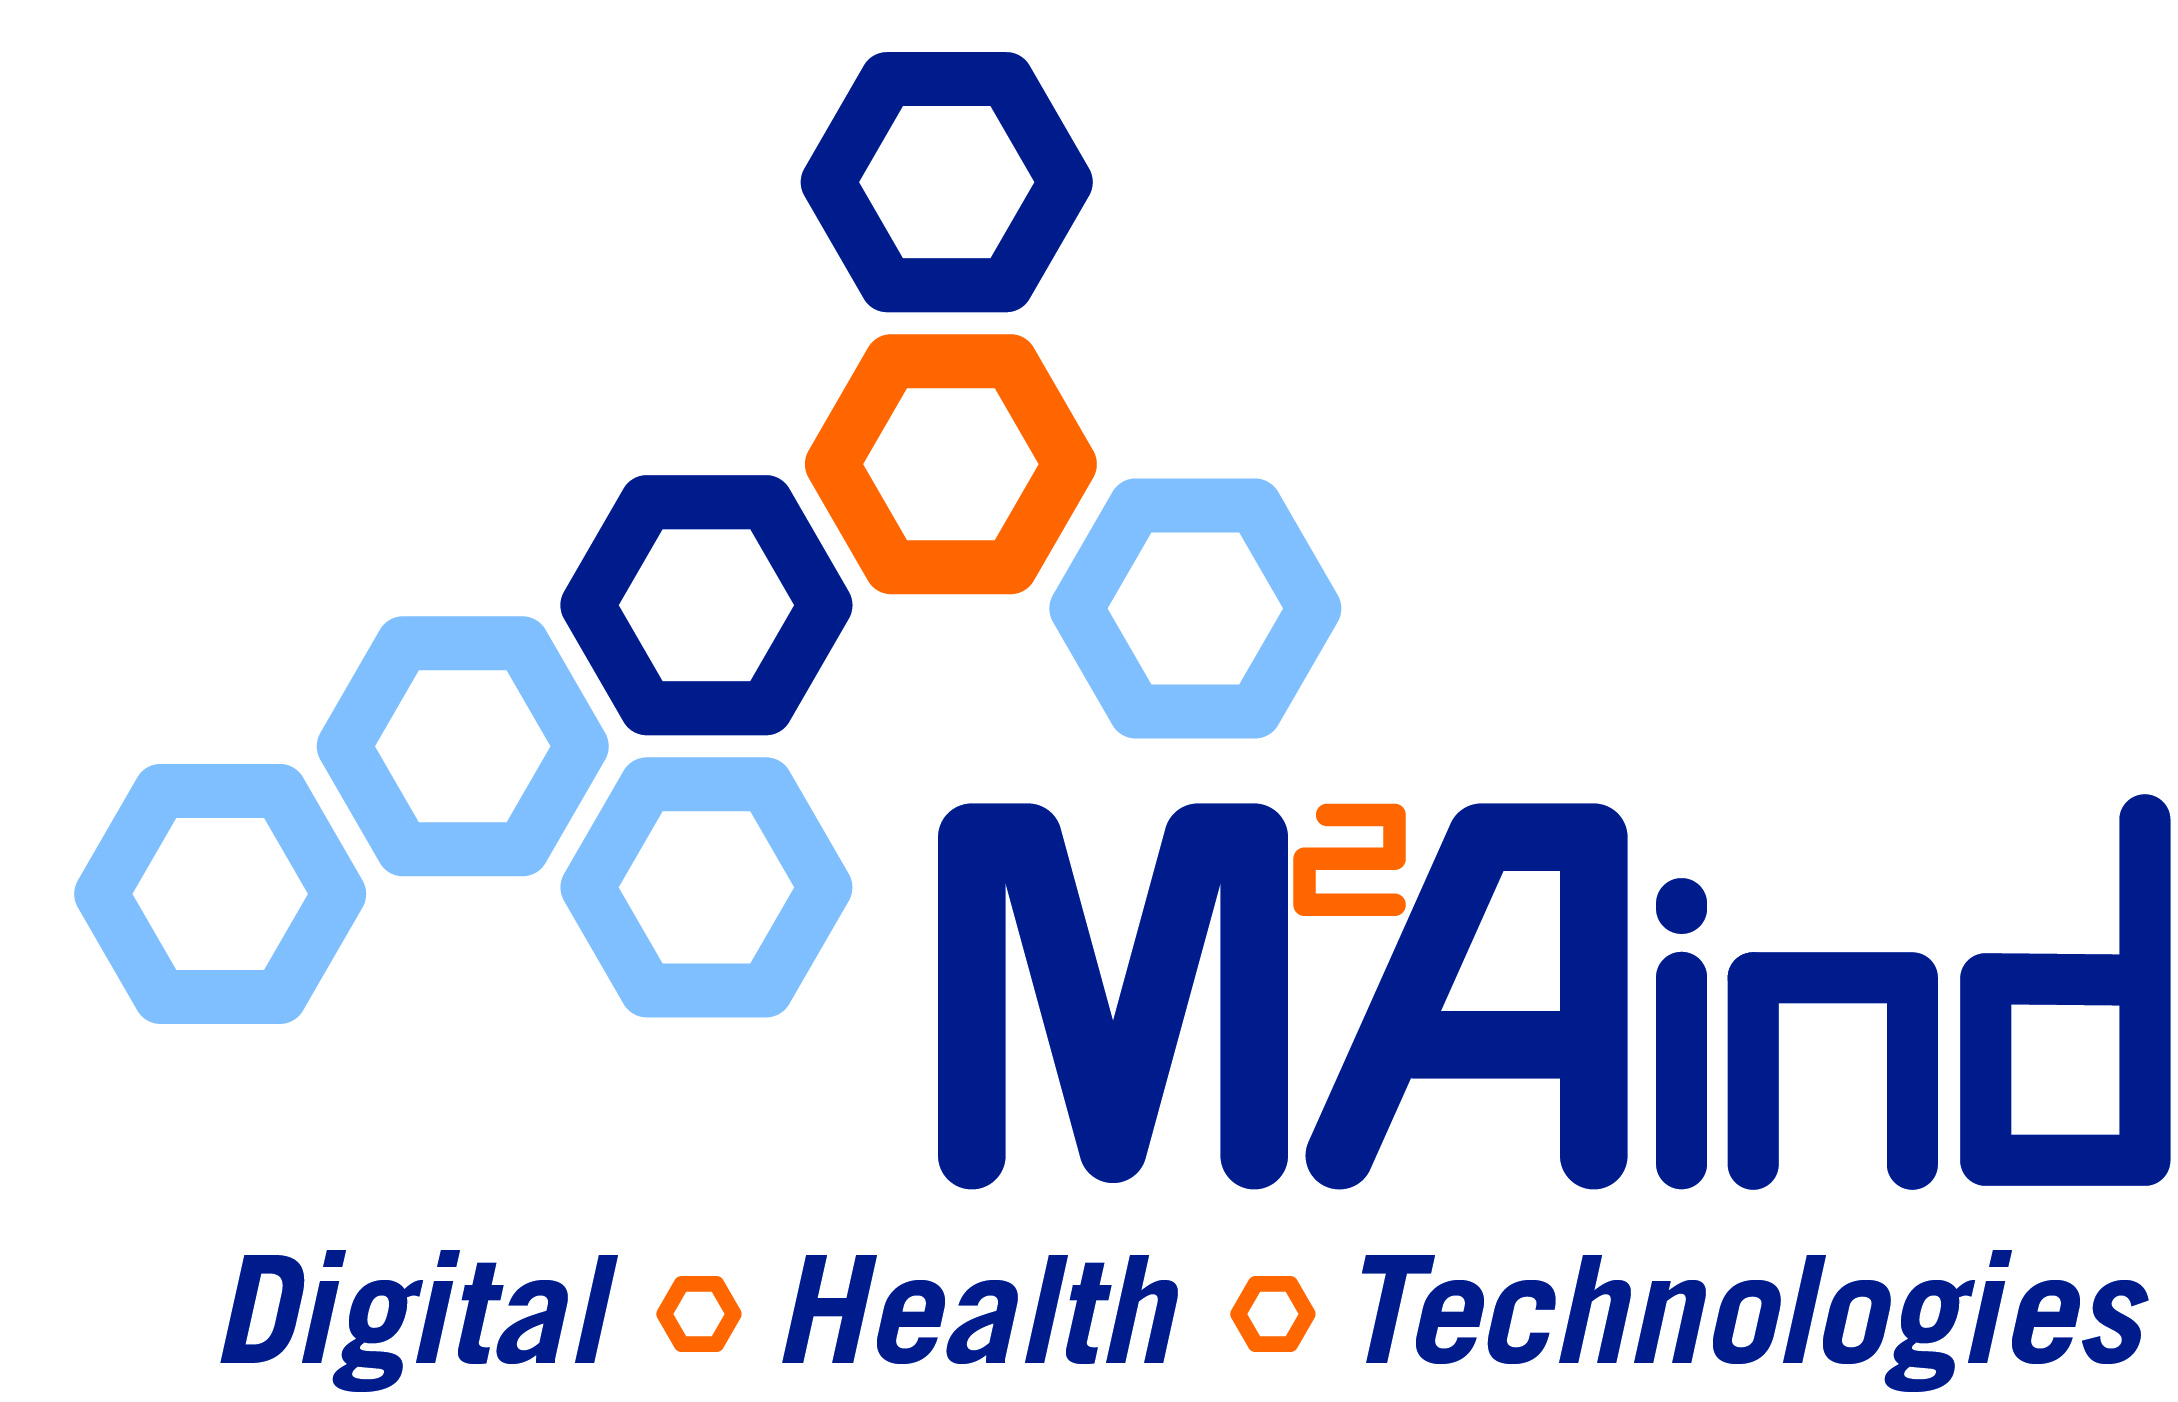 Image of the M2Aind logo with the three words Digital , Health and Technologies underneath.